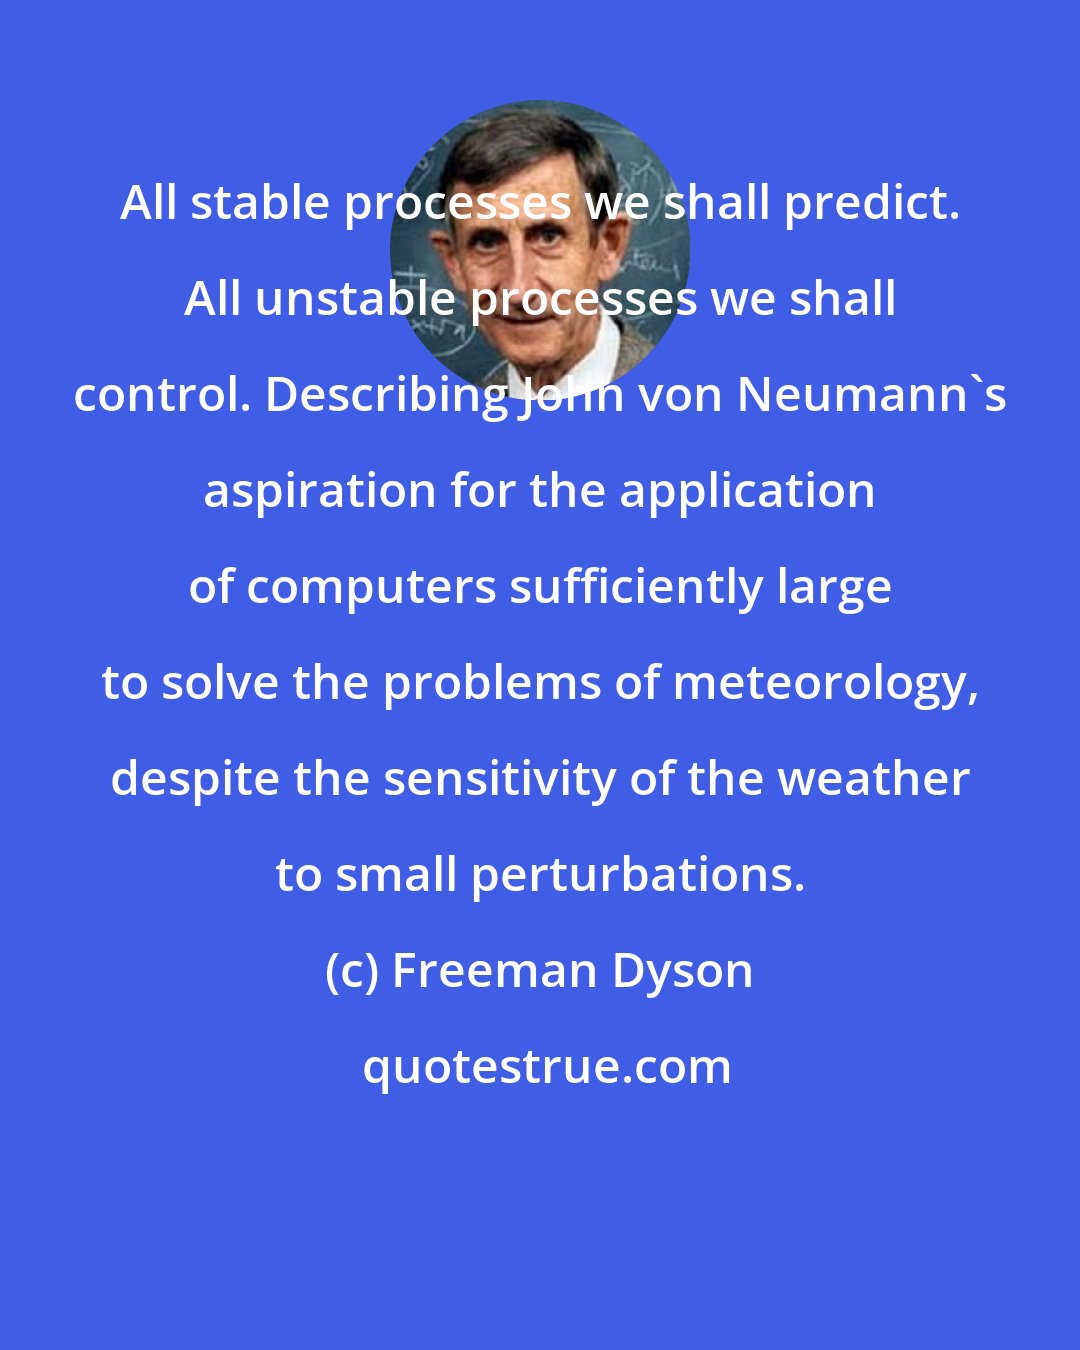 Freeman Dyson: All stable processes we shall predict. All unstable processes we shall control. Describing John von Neumann's aspiration for the application of computers sufficiently large to solve the problems of meteorology, despite the sensitivity of the weather to small perturbations.